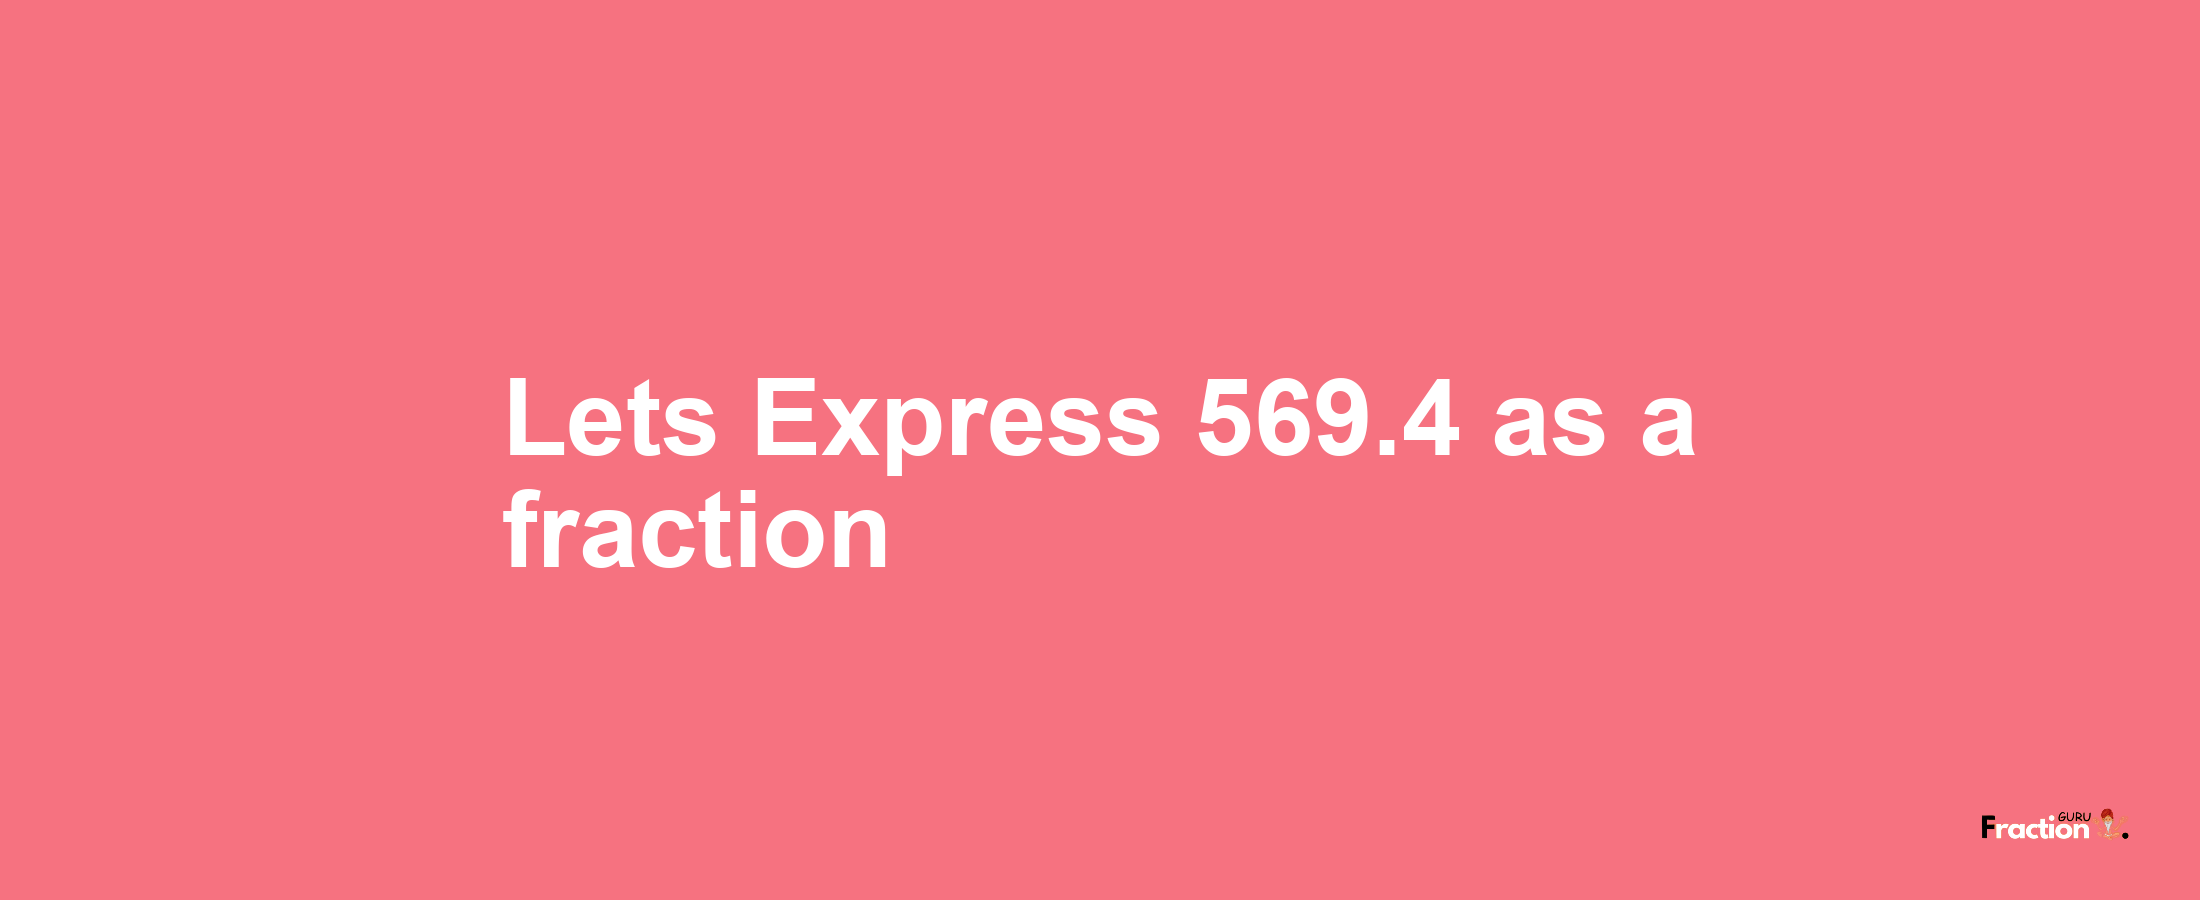 Lets Express 569.4 as afraction